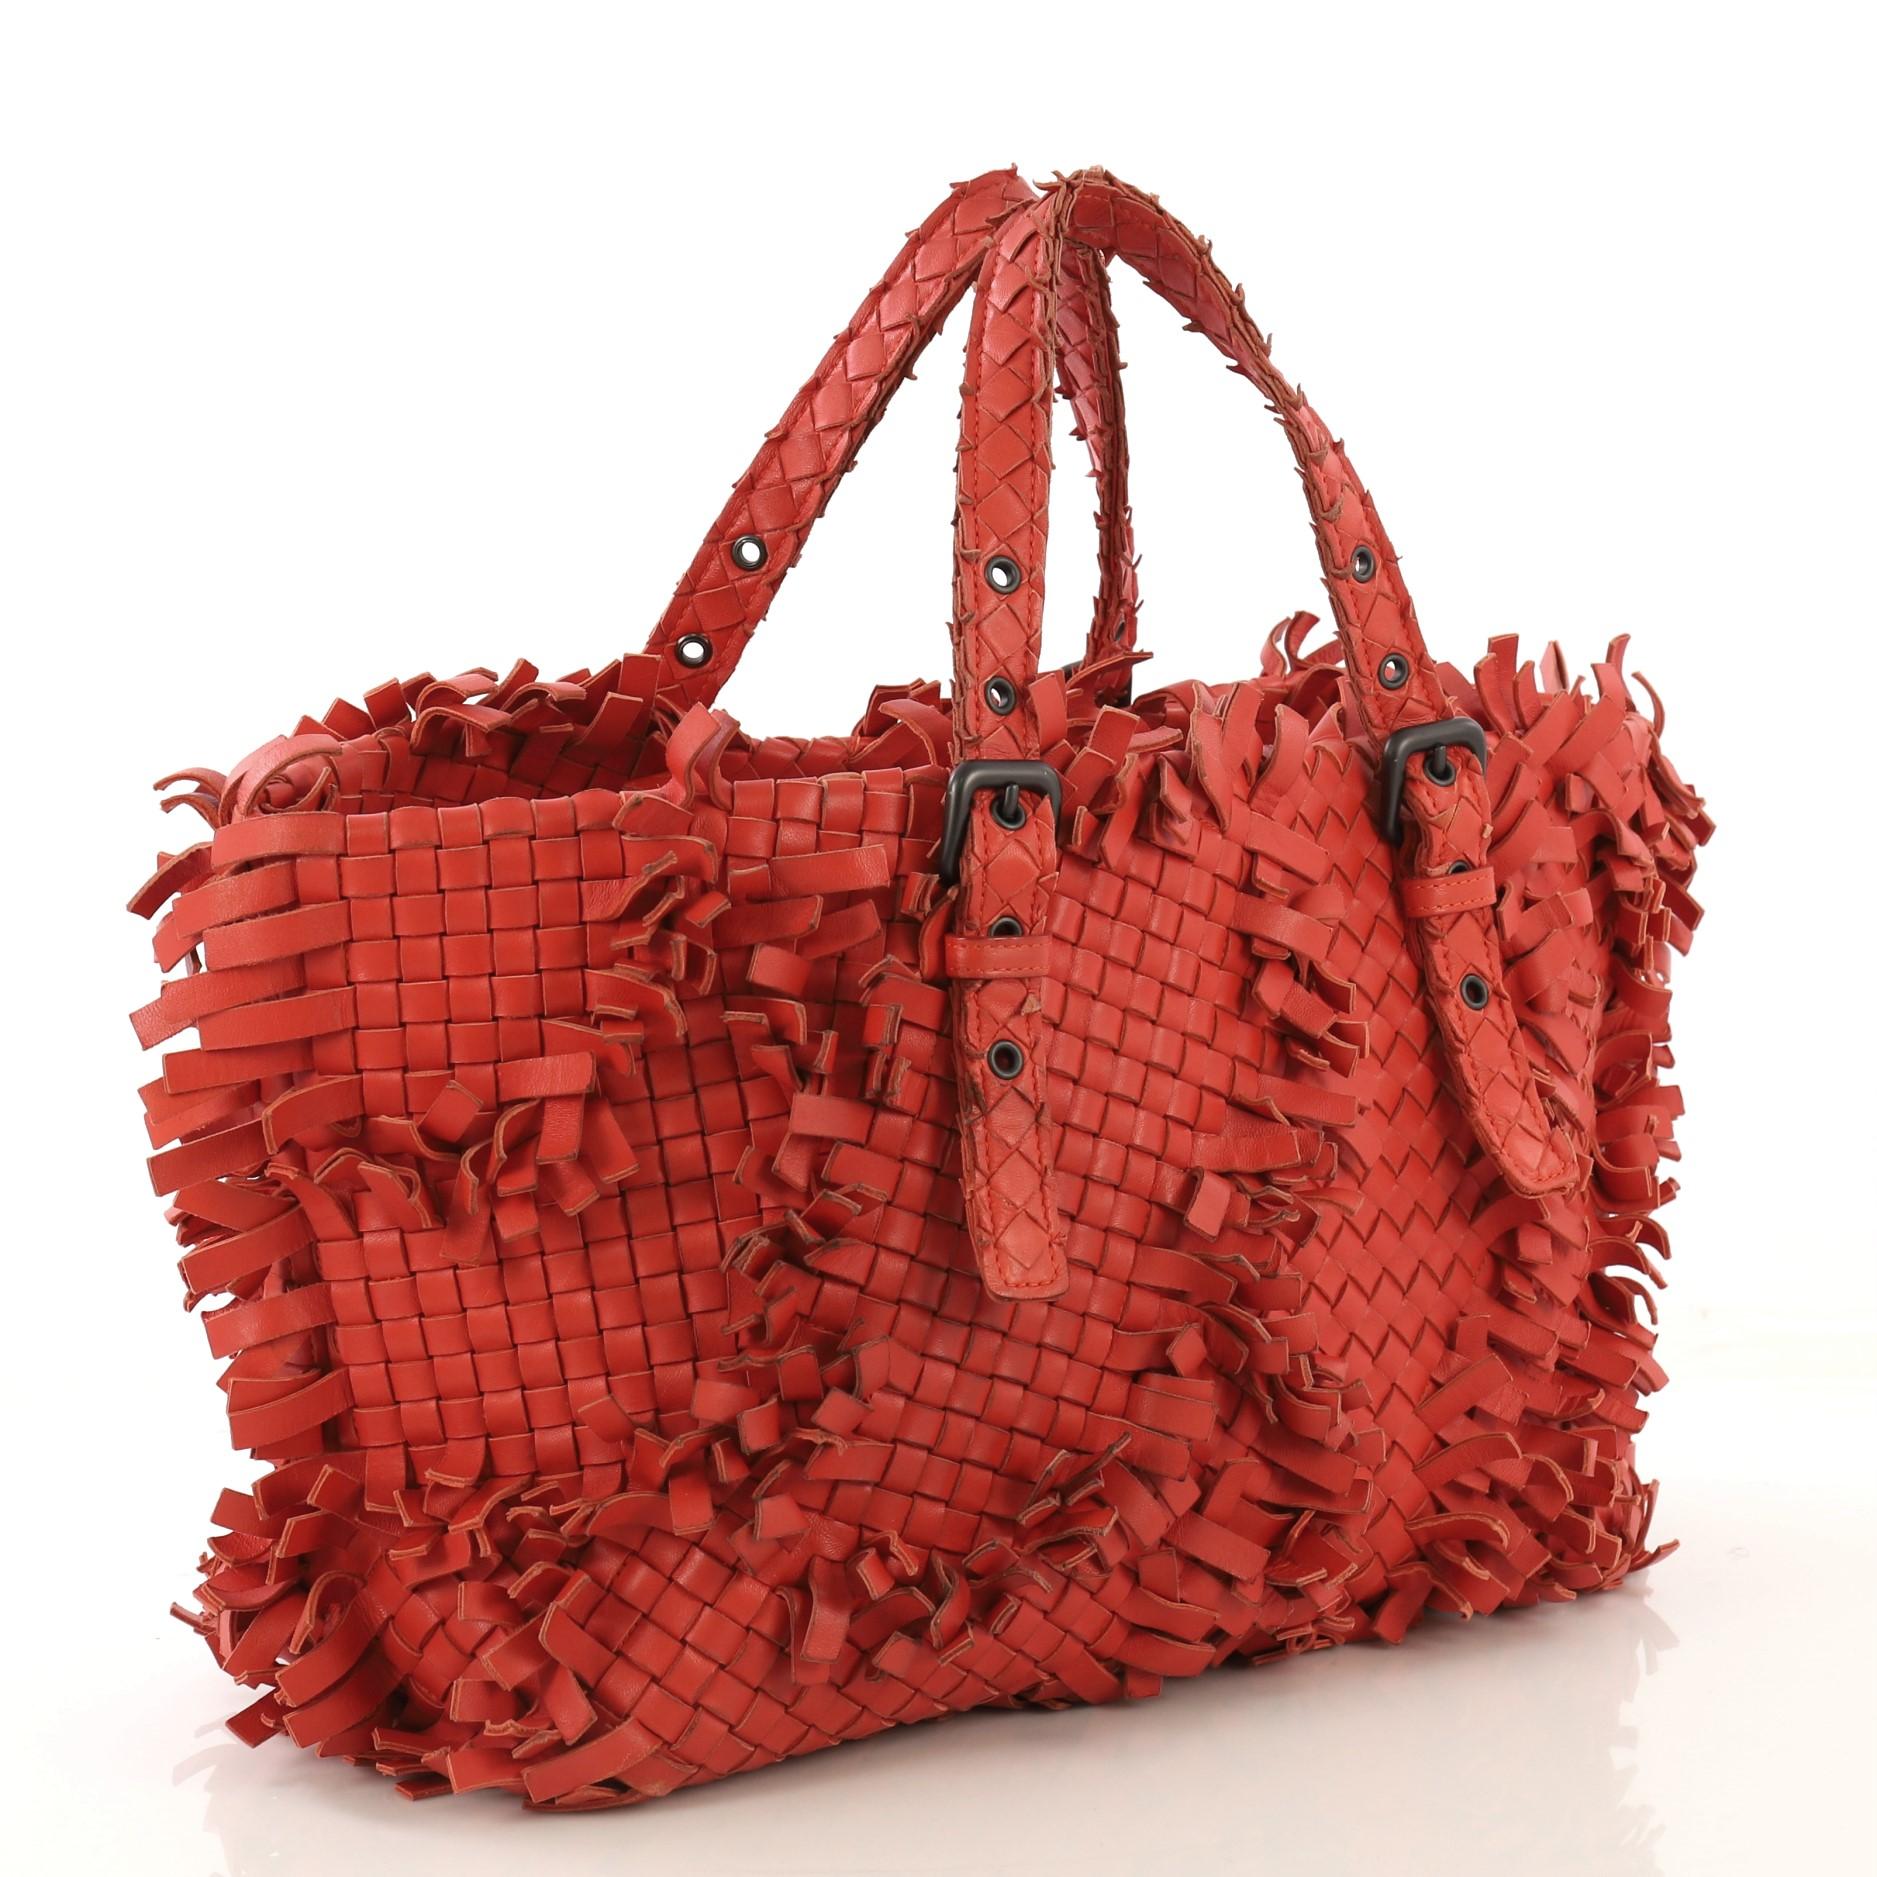 This Bottega Veneta Lido Patchwork Tote Fringe Intrecciato Nappa Large, crafted in red fringe intrecciato nappa leather, features dual handles with buckle and belt accents, patchwork and frayed fringed detailing, and gunmetal-tone hardware. It opens